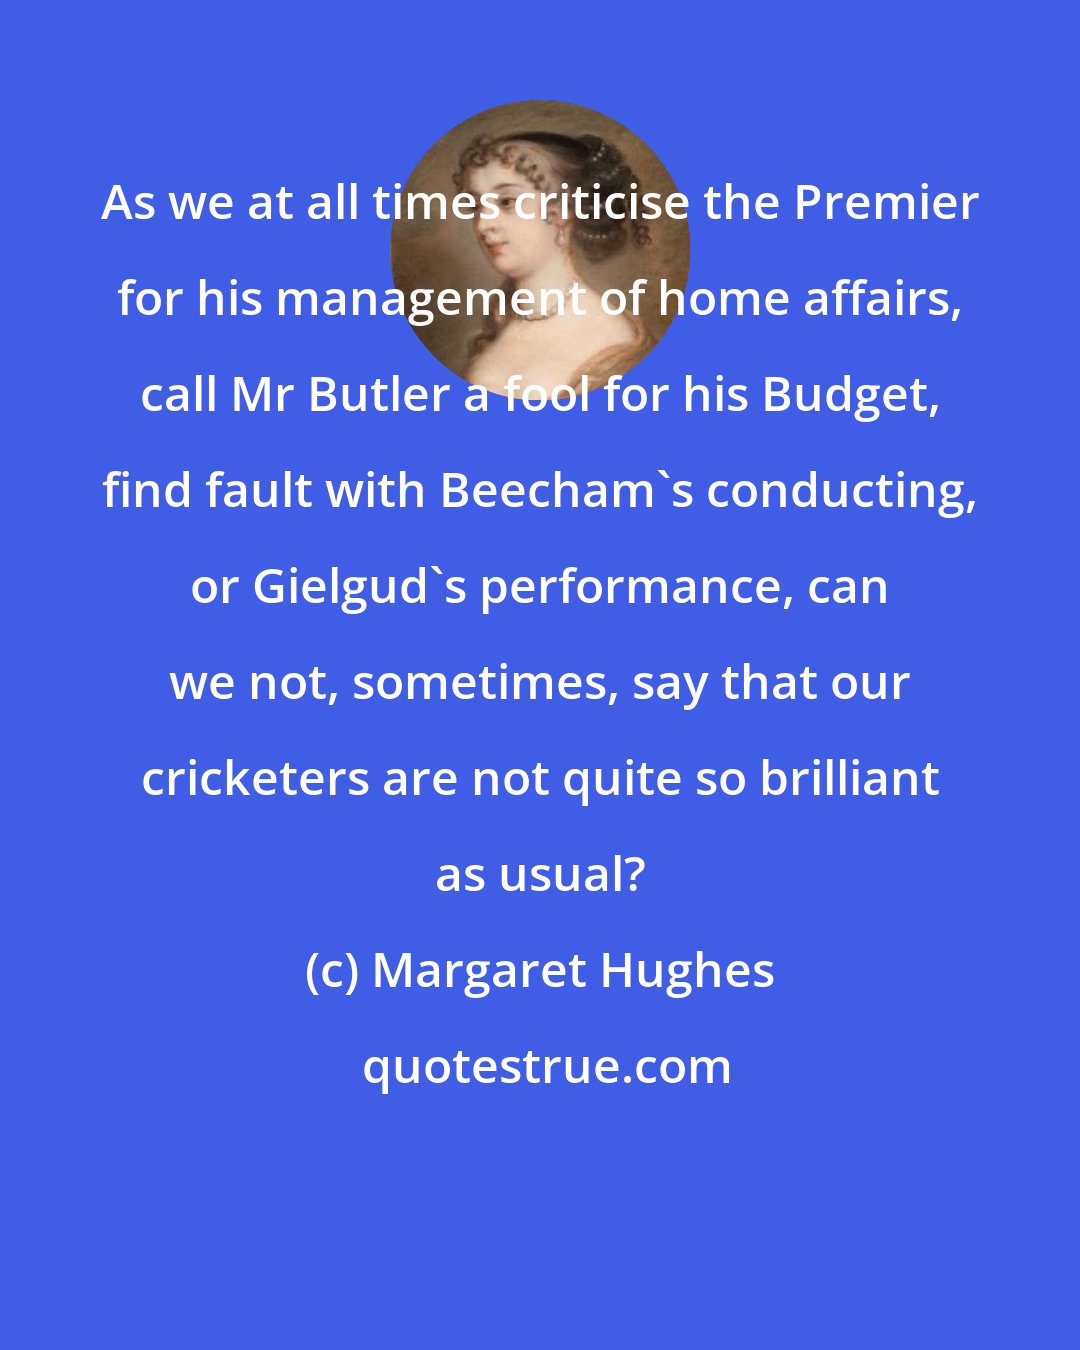 Margaret Hughes: As we at all times criticise the Premier for his management of home affairs, call Mr Butler a fool for his Budget, find fault with Beecham's conducting, or Gielgud's performance, can we not, sometimes, say that our cricketers are not quite so brilliant as usual?